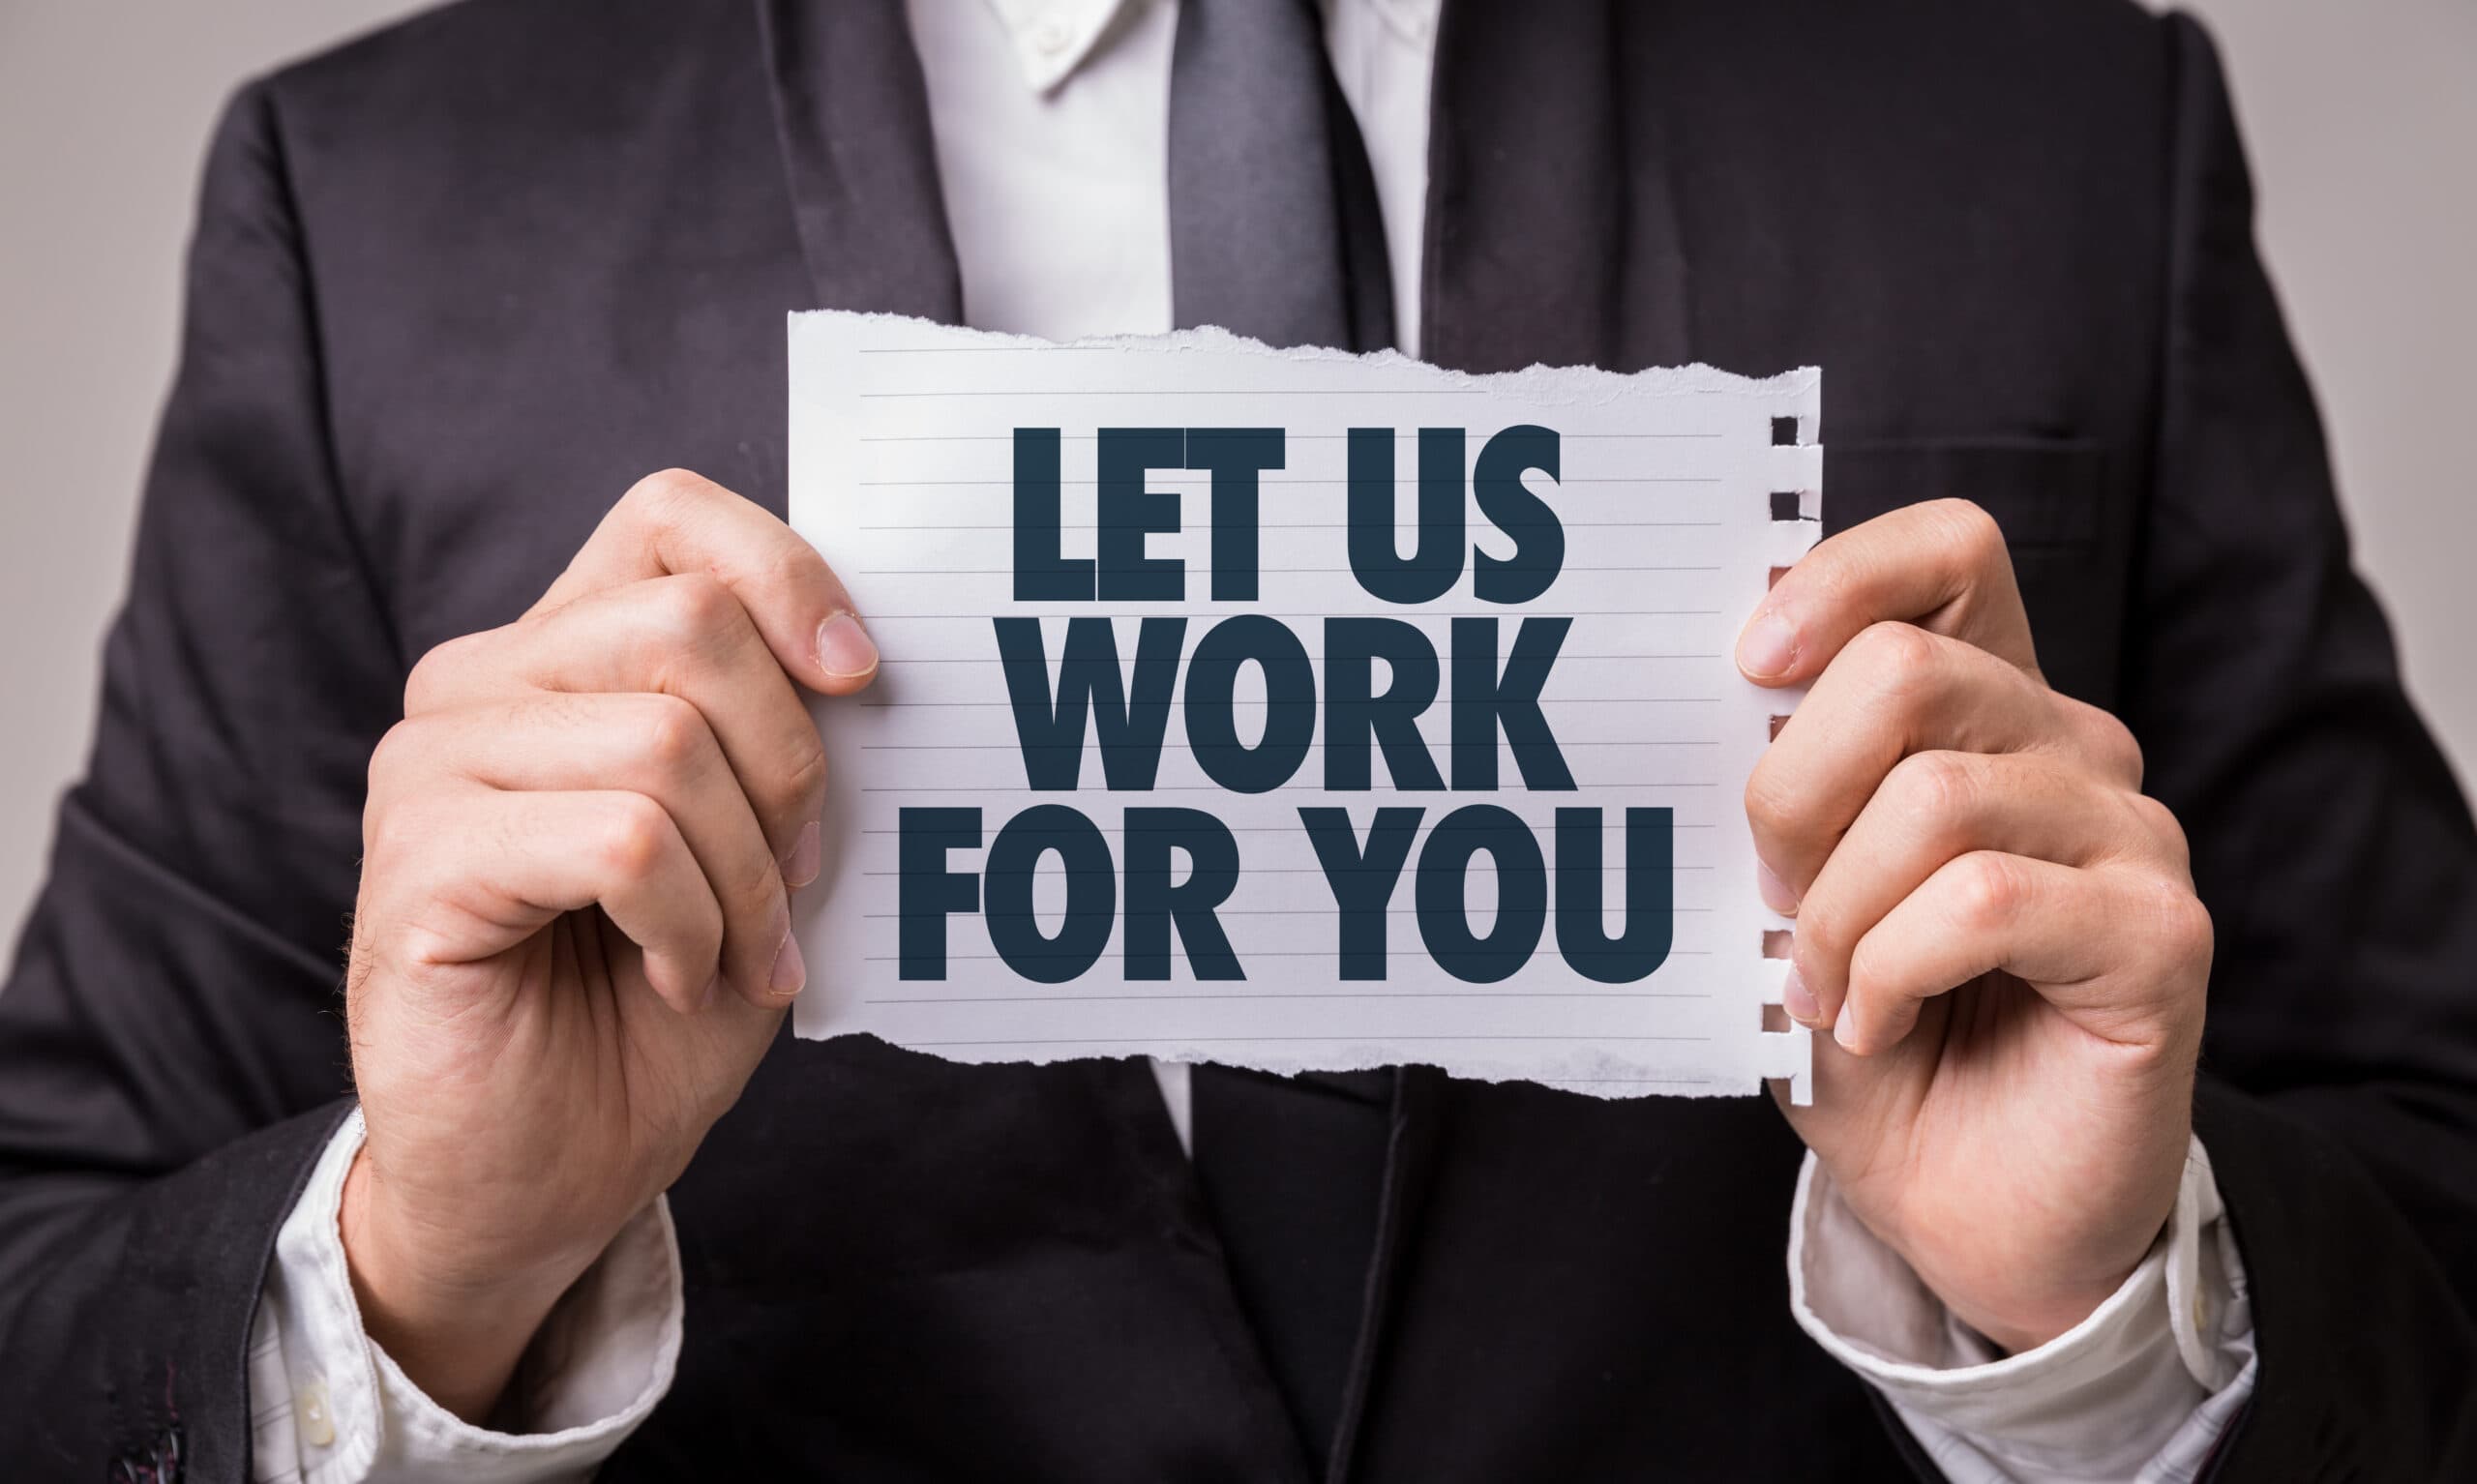 Let us work for you